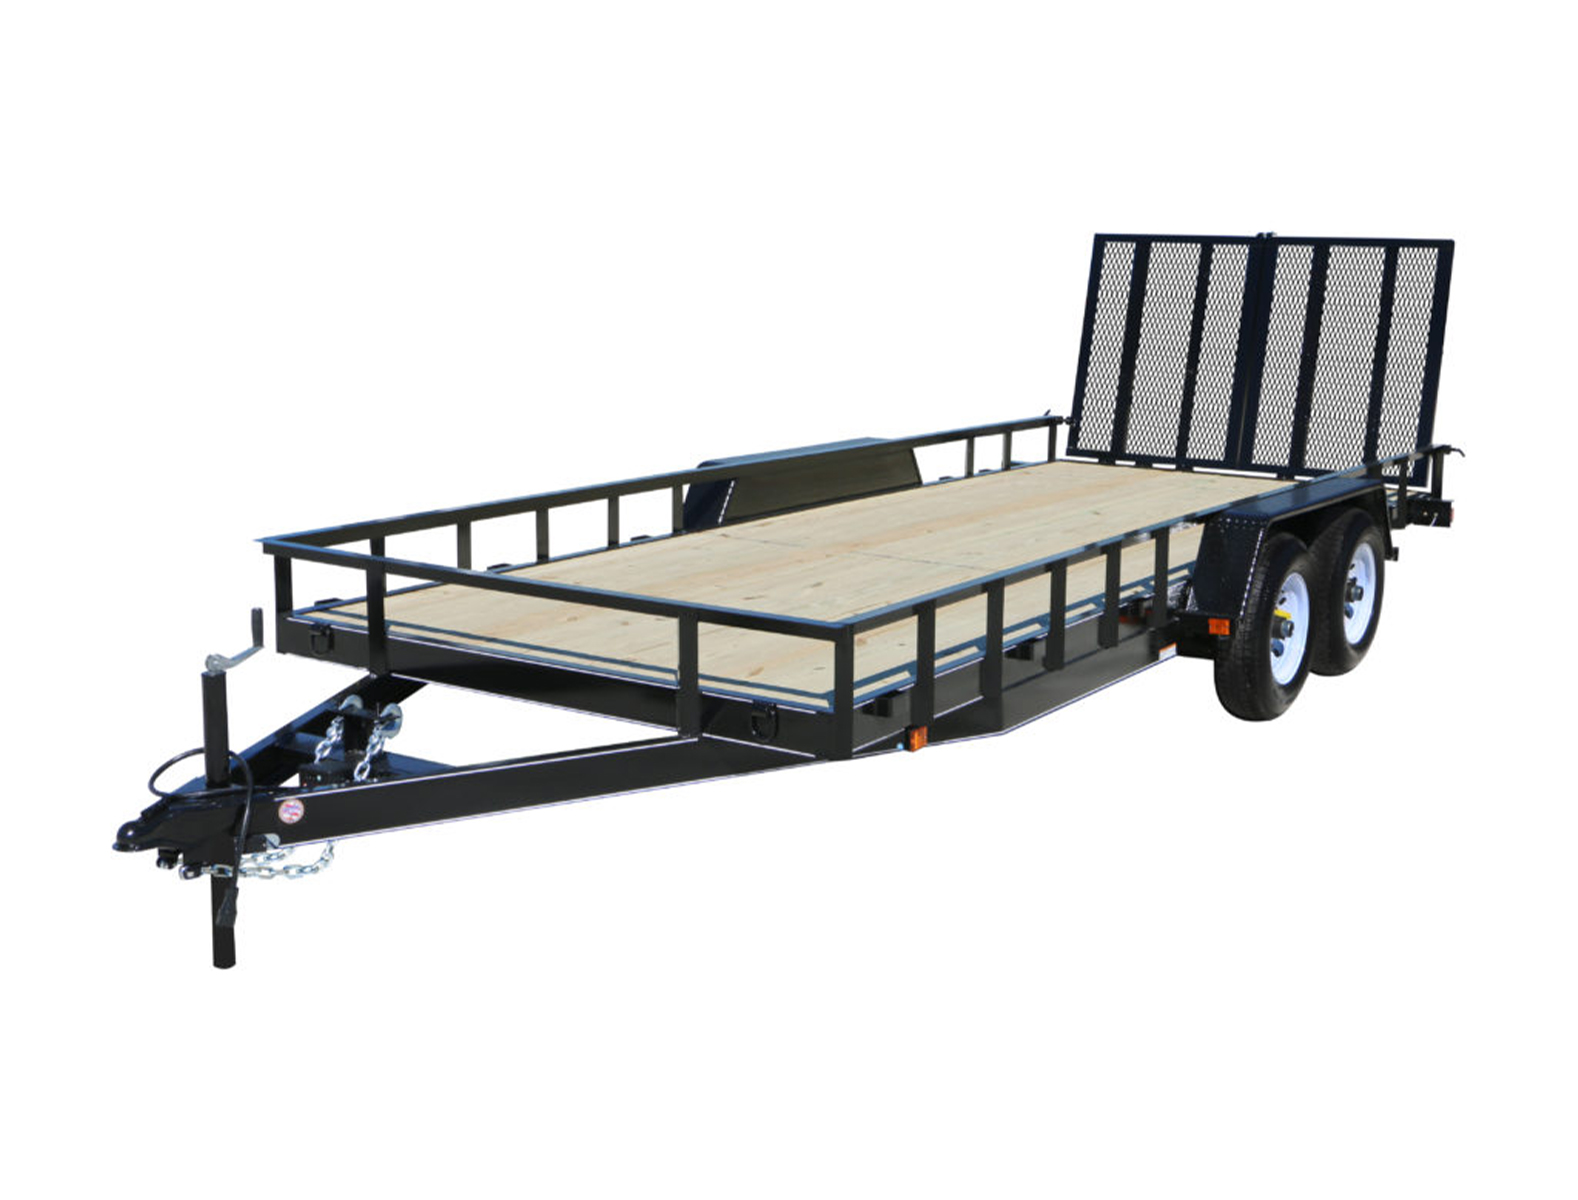 10K TANDEM AXLE UTILITY TRAILER with wood floor and gate